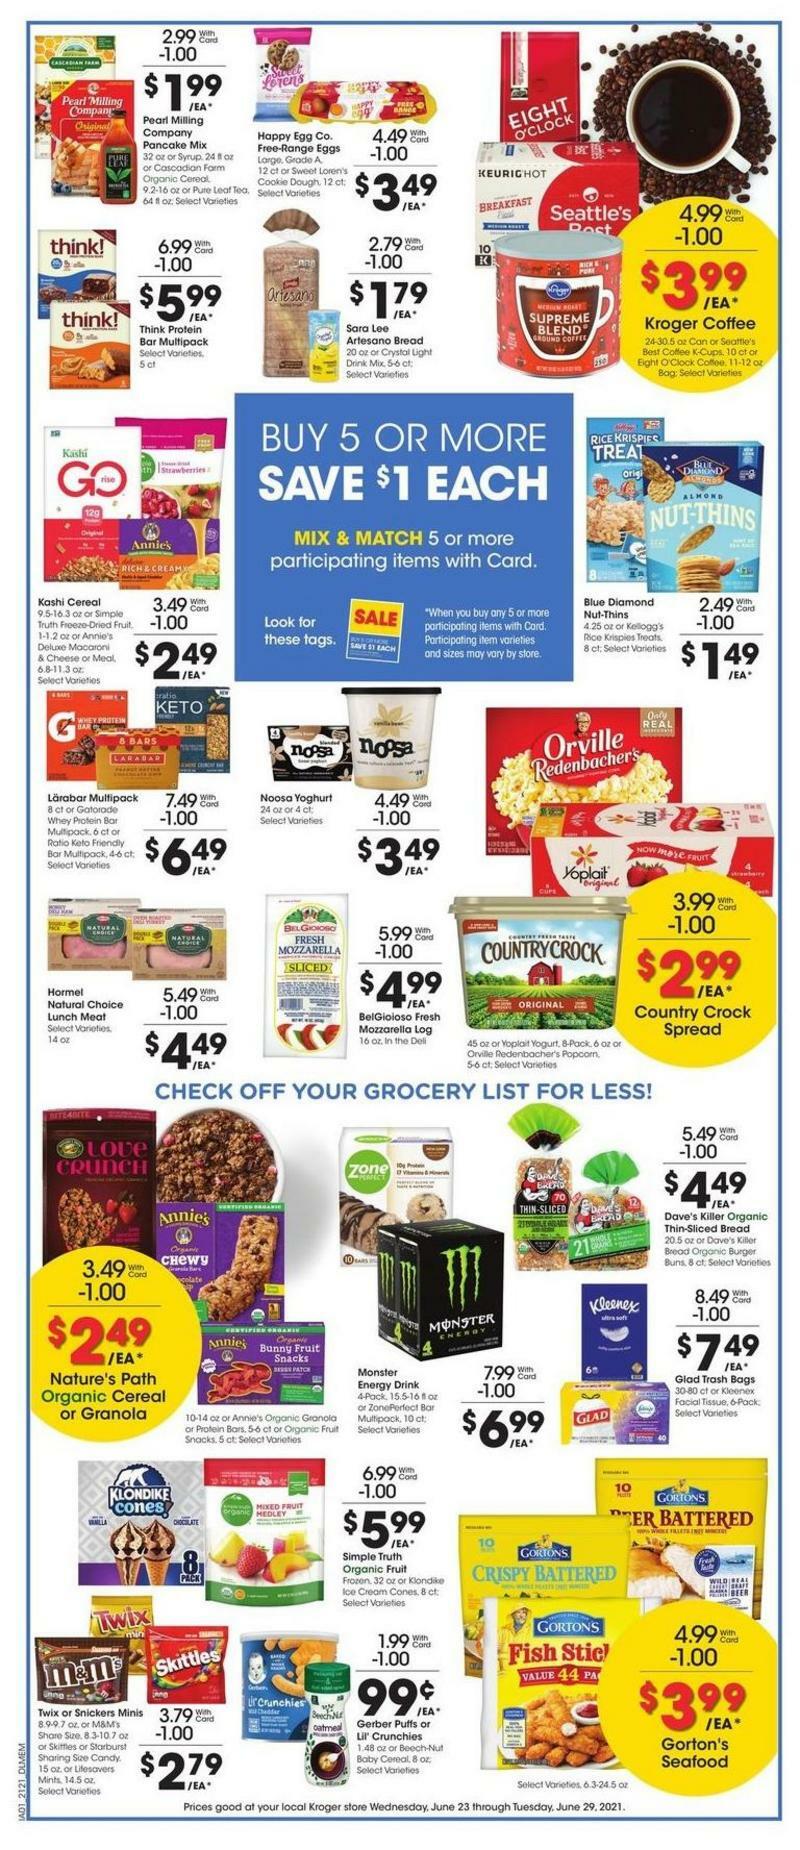 Kroger Weekly Ads & Special Buys from June 23 Page 3